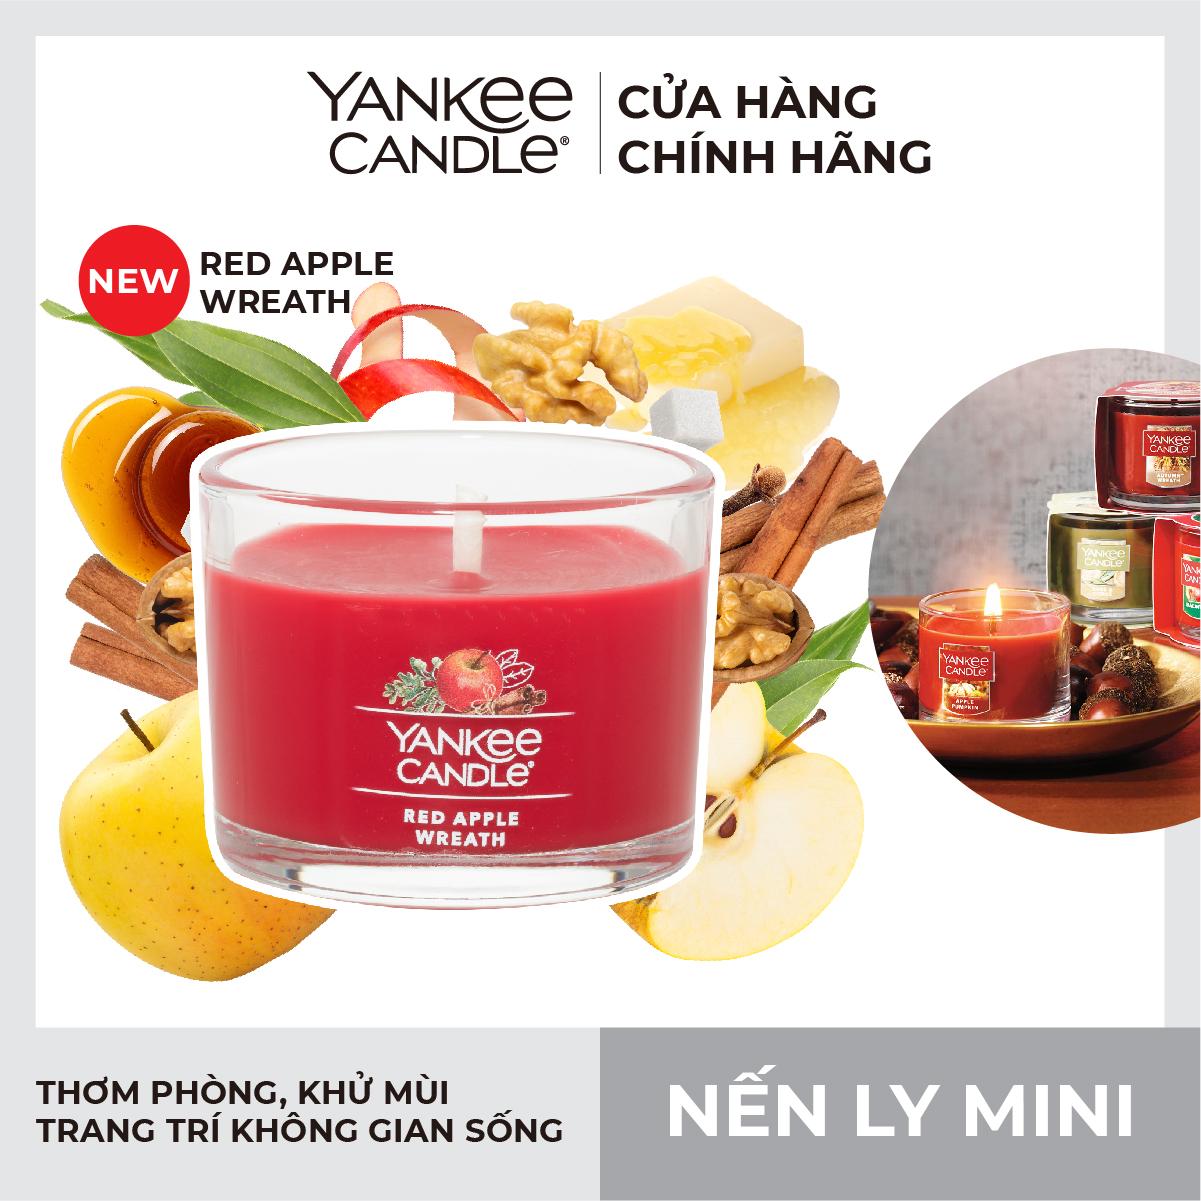 Nến ly mini Yankee Candle (37g) - Red Apple Wreath